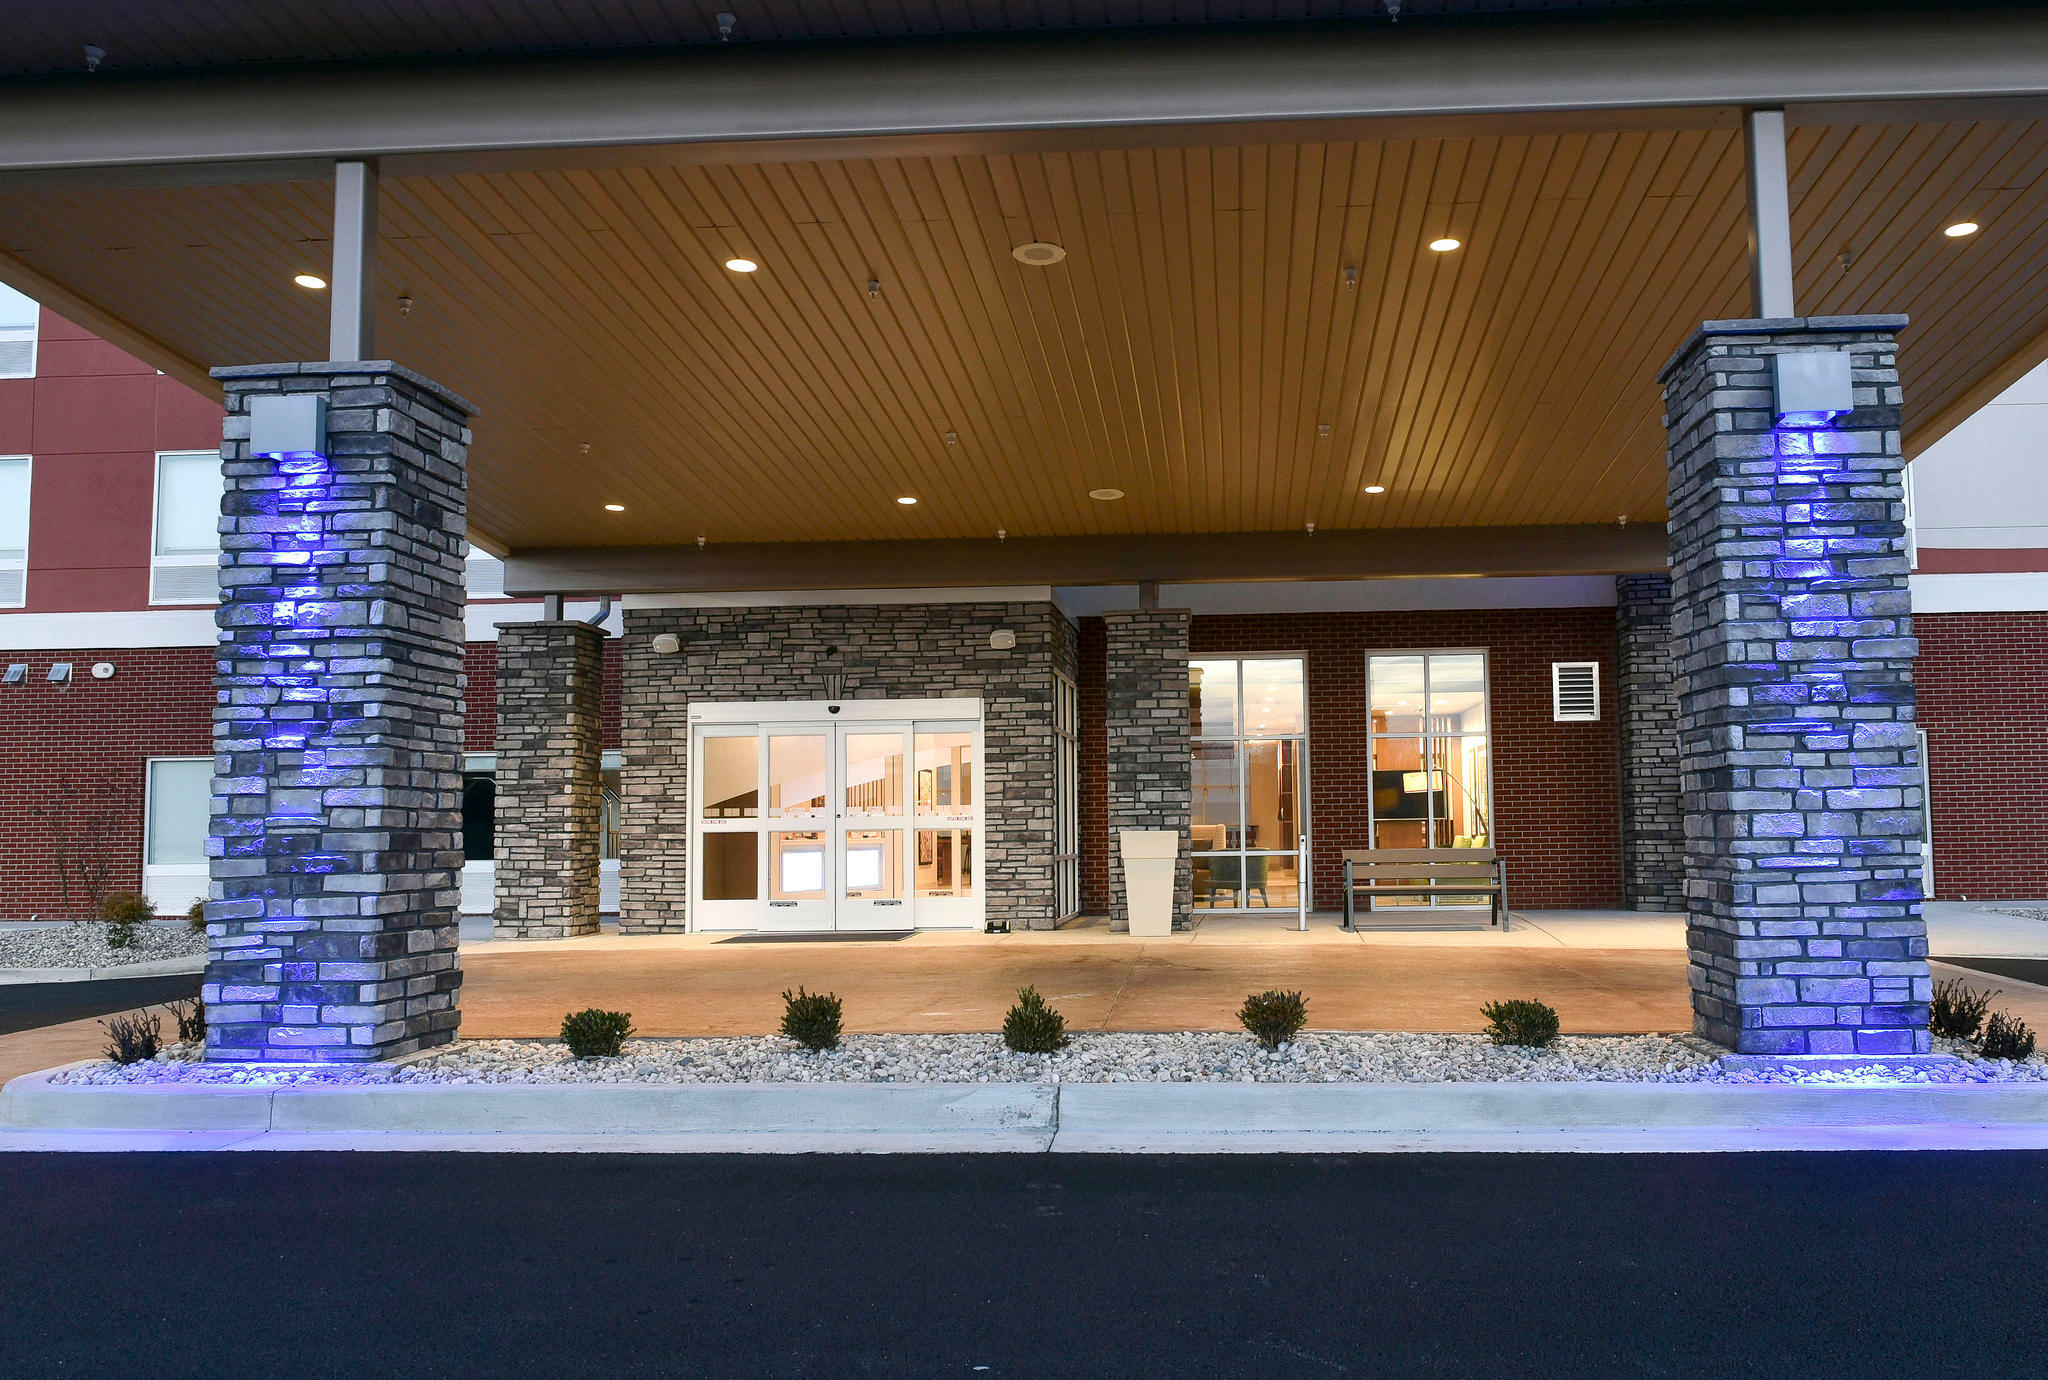 Holiday Inn Express & Suites Madisonville Photo